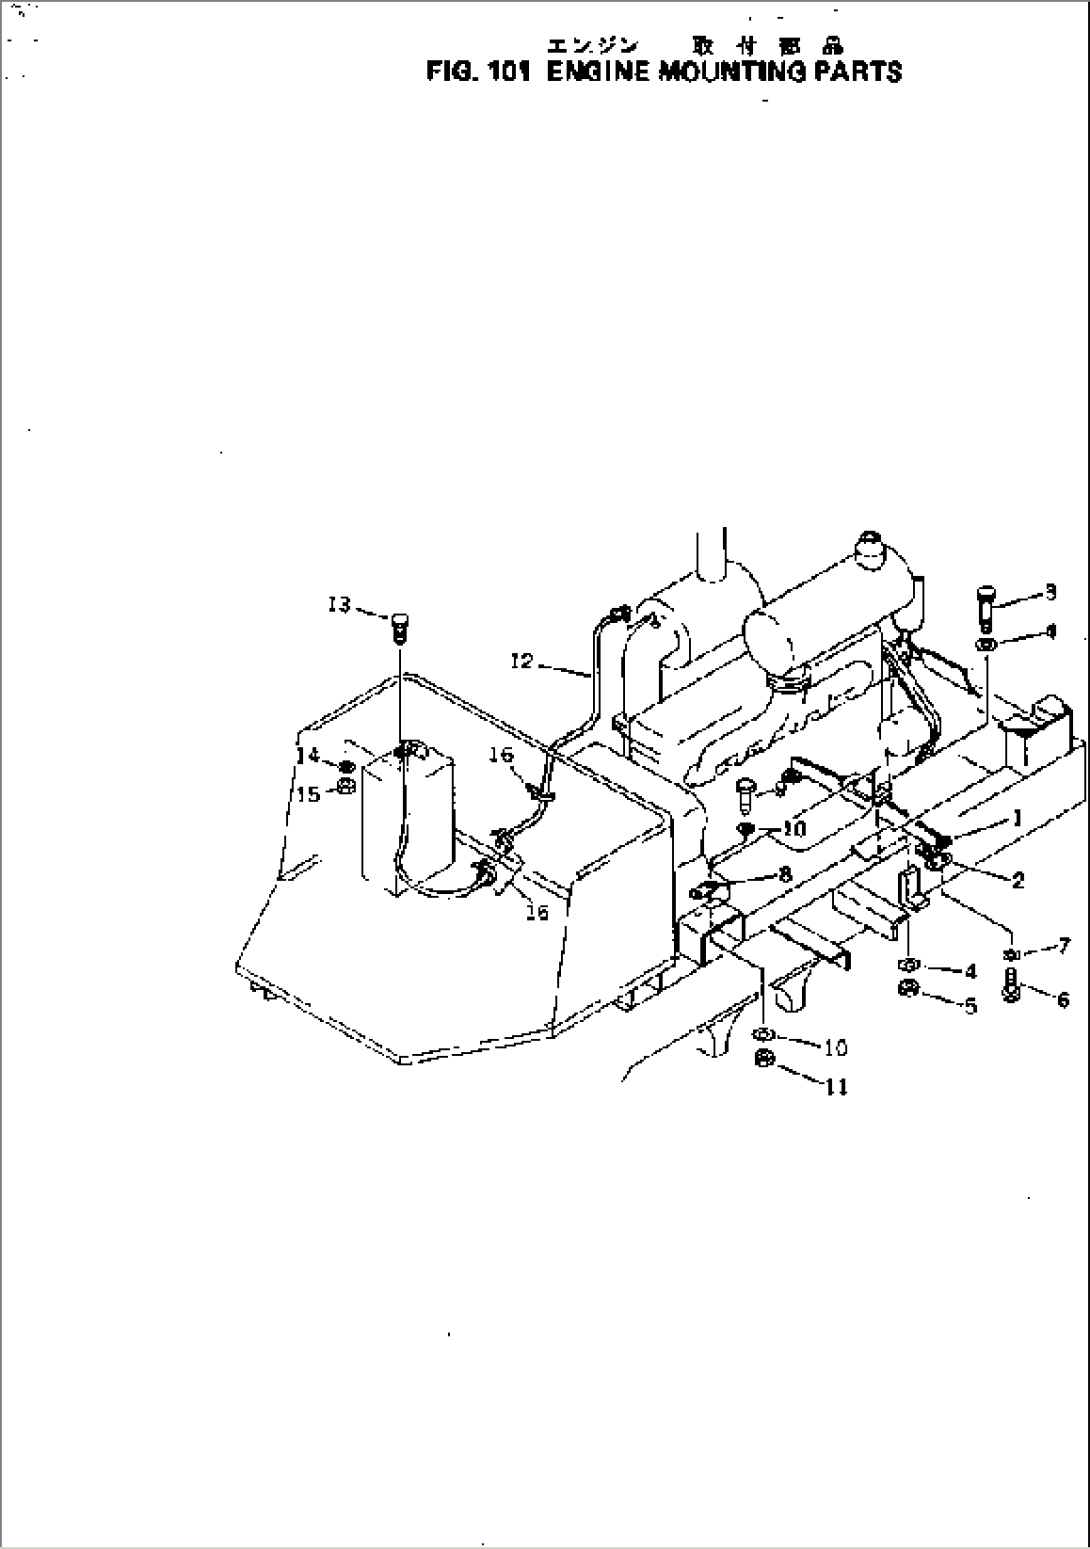 ENGINE MOUTING PARTS